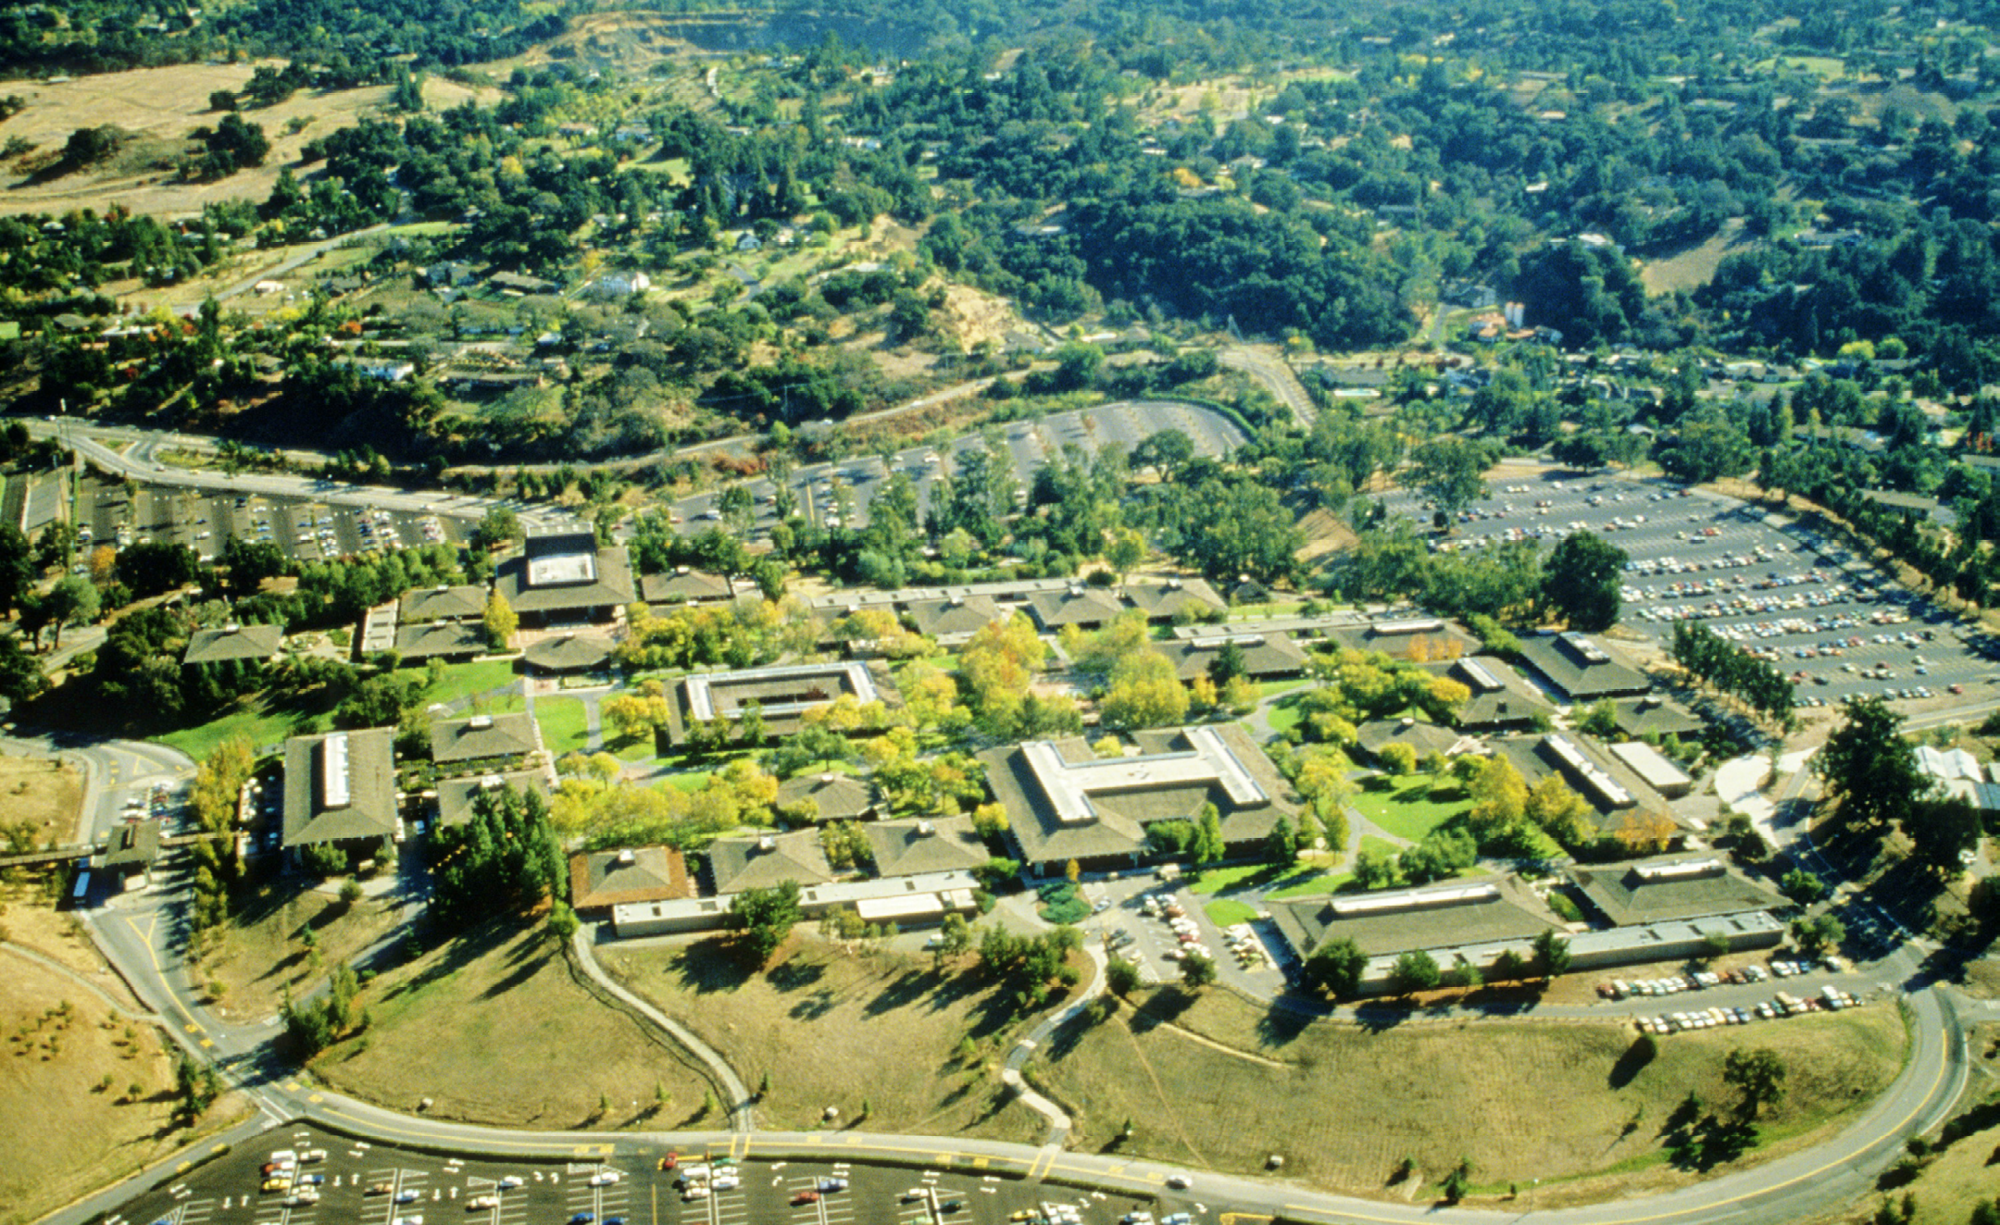 Foothill College_Slideshow_1.png